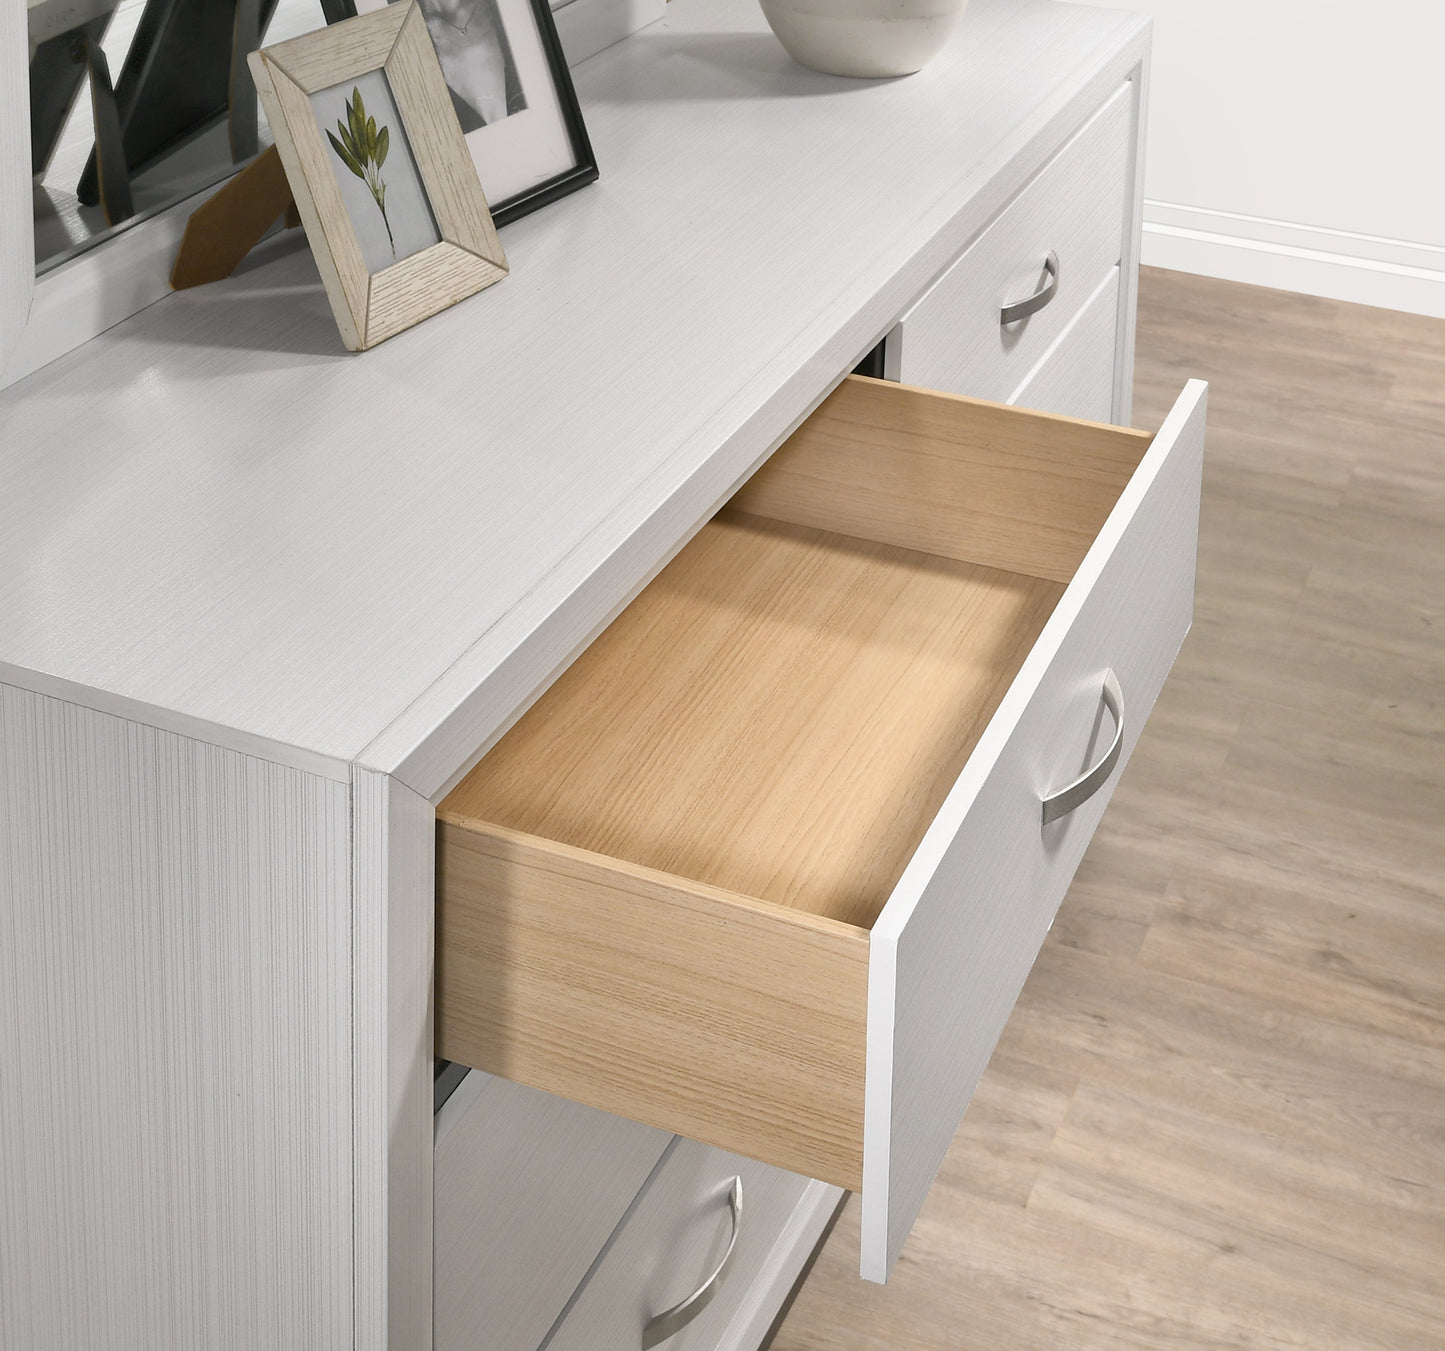 Stout Contemporary 6-Drawer Metal Bar Pulls Wood Dresser with Mirror, White